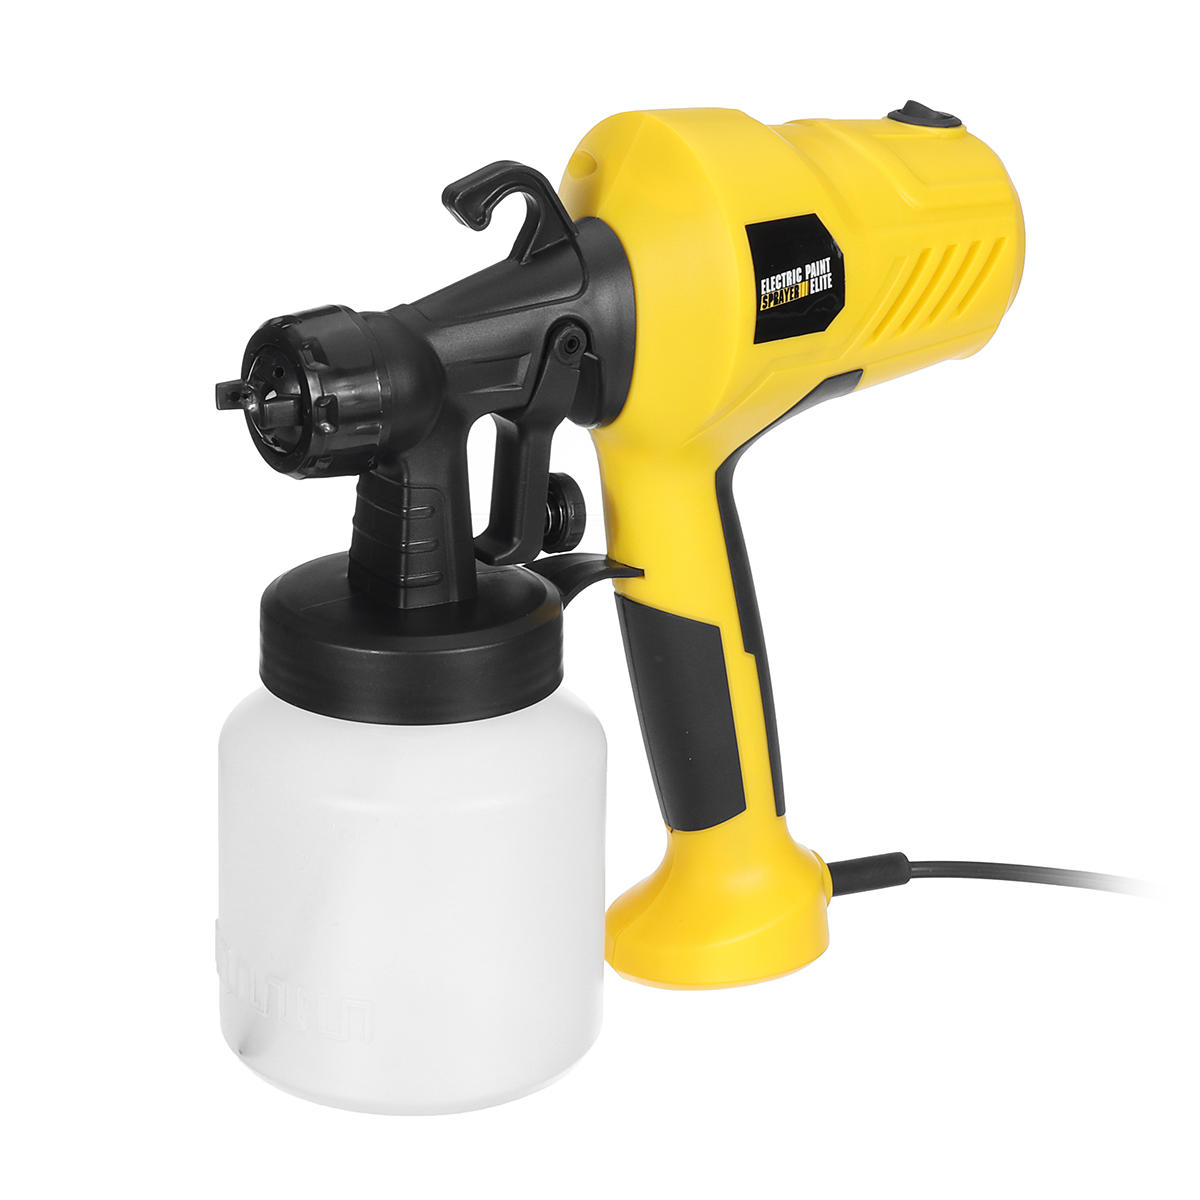 600W Electric Spray Paint Sprayer For Cars Wood Furniture Wall Woodworking